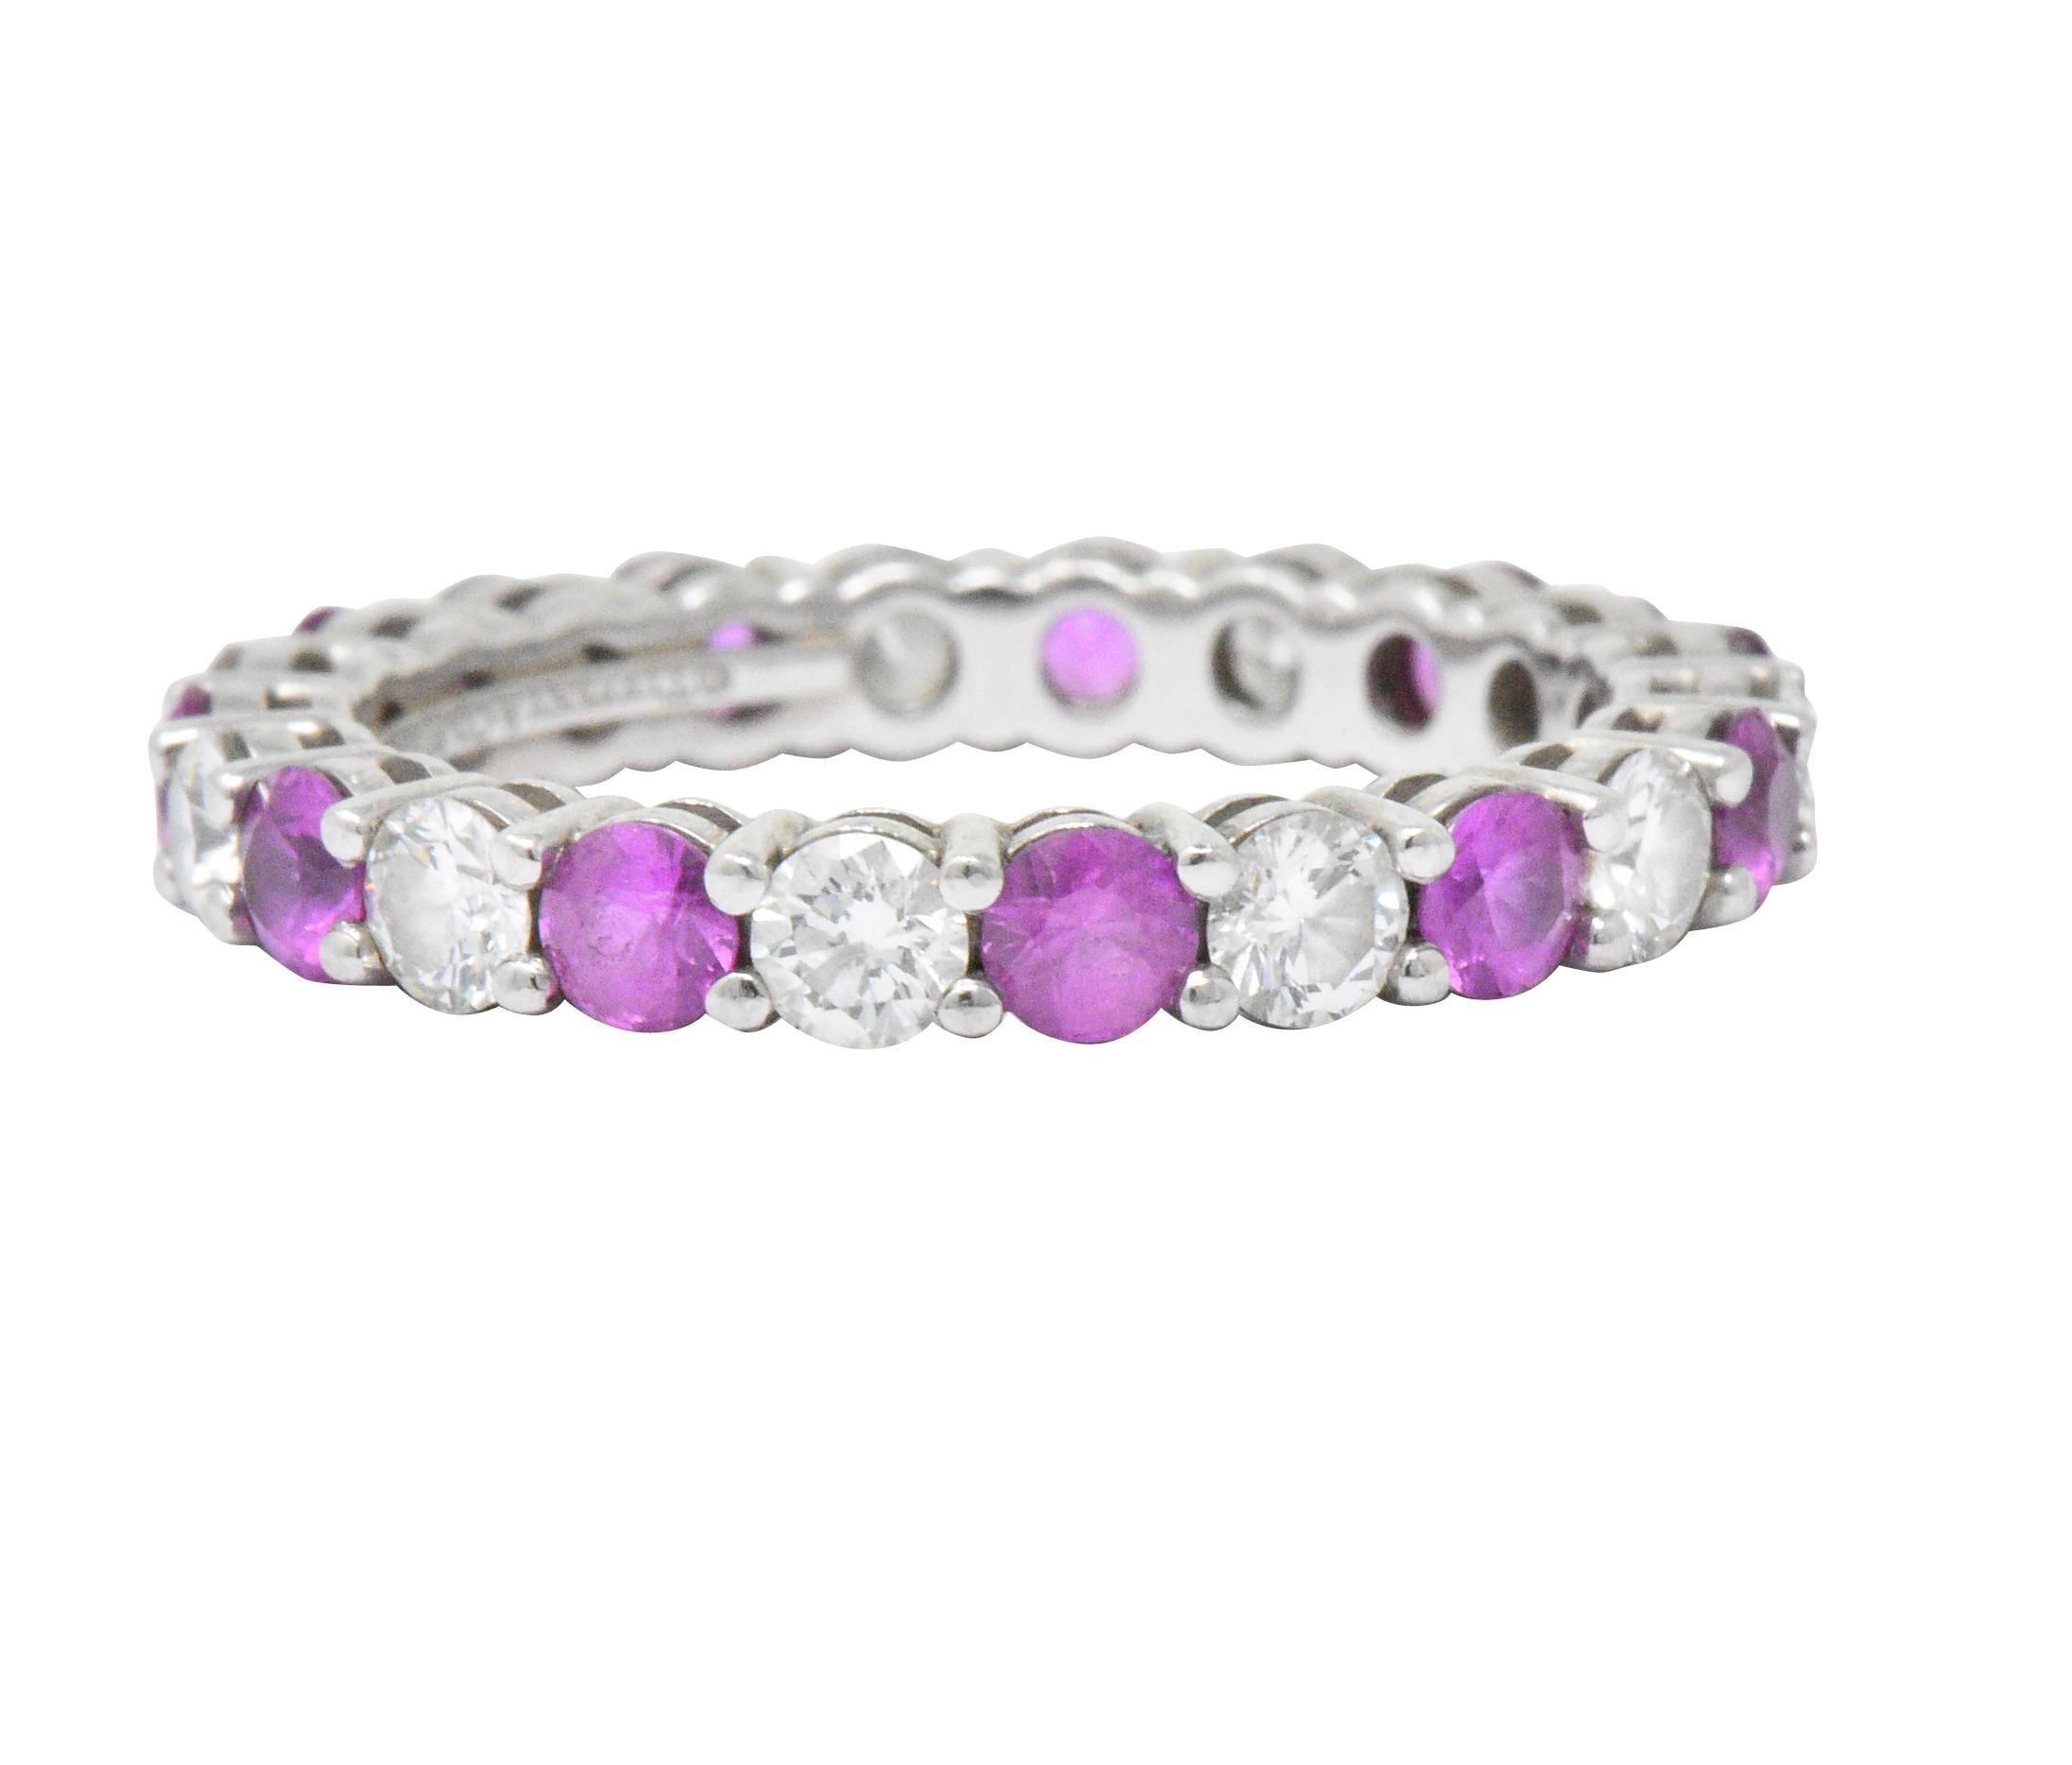  

Featuring approximately 0.77 CTW of (11) round brilliant cut diamonds F-G color and VS clarity

Alternating (11) bright pink natural sapphires weighing 1.08 CTW

From the Embrace Collection 

Fully signed Tiffany & Co. PT950

Size: 5.5 and not